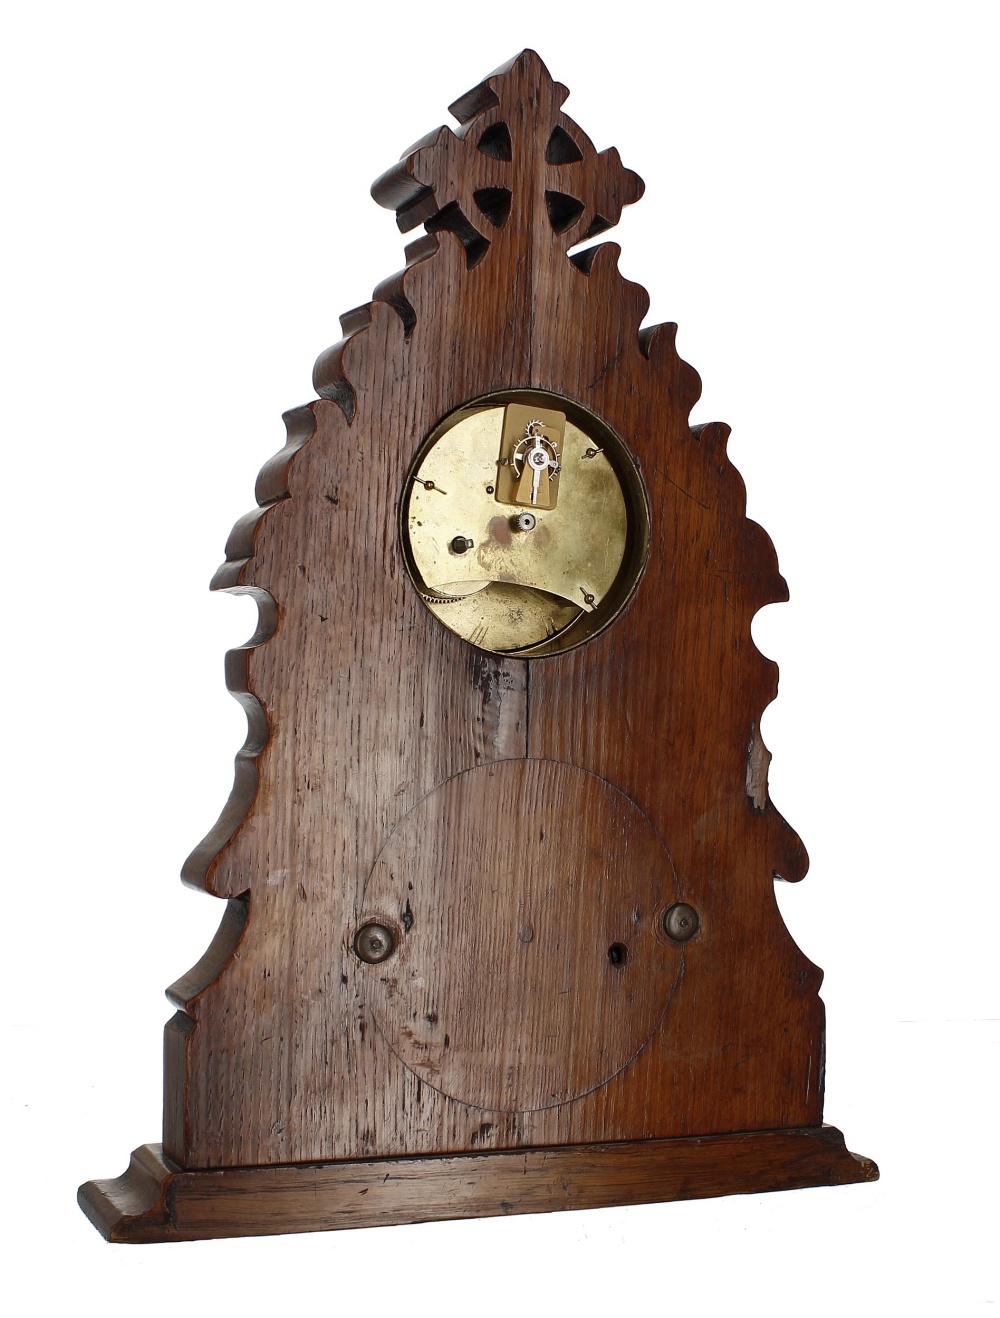 Gothic carved oak shelf clock / barometer compendium, the case with a roof pitch surmounted by a - Image 2 of 2